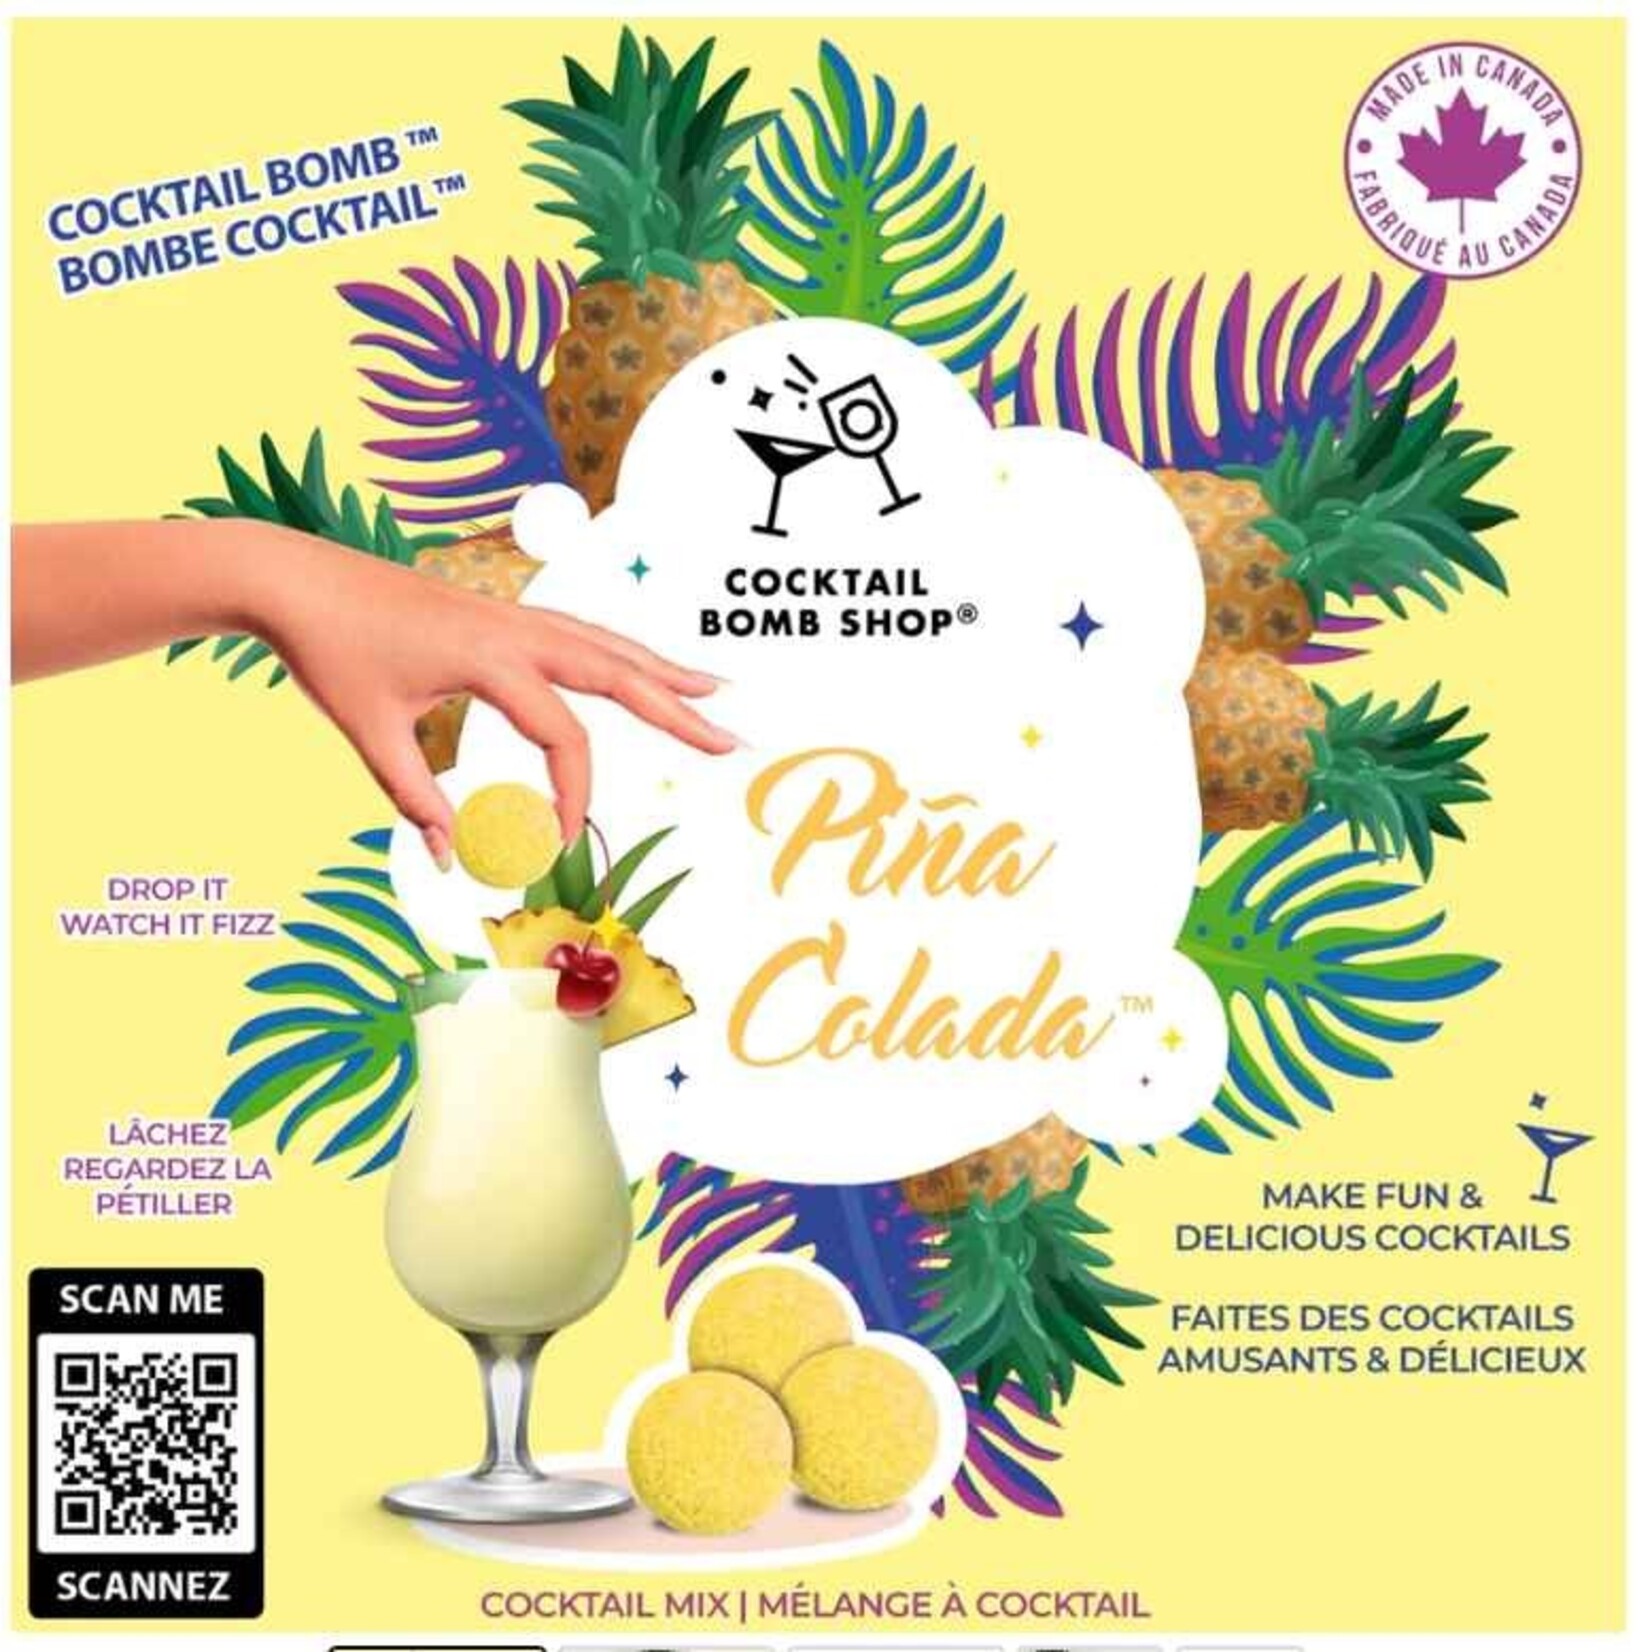 Cocktail Bomb Pina Colada Cocktail Bomb 4 pack